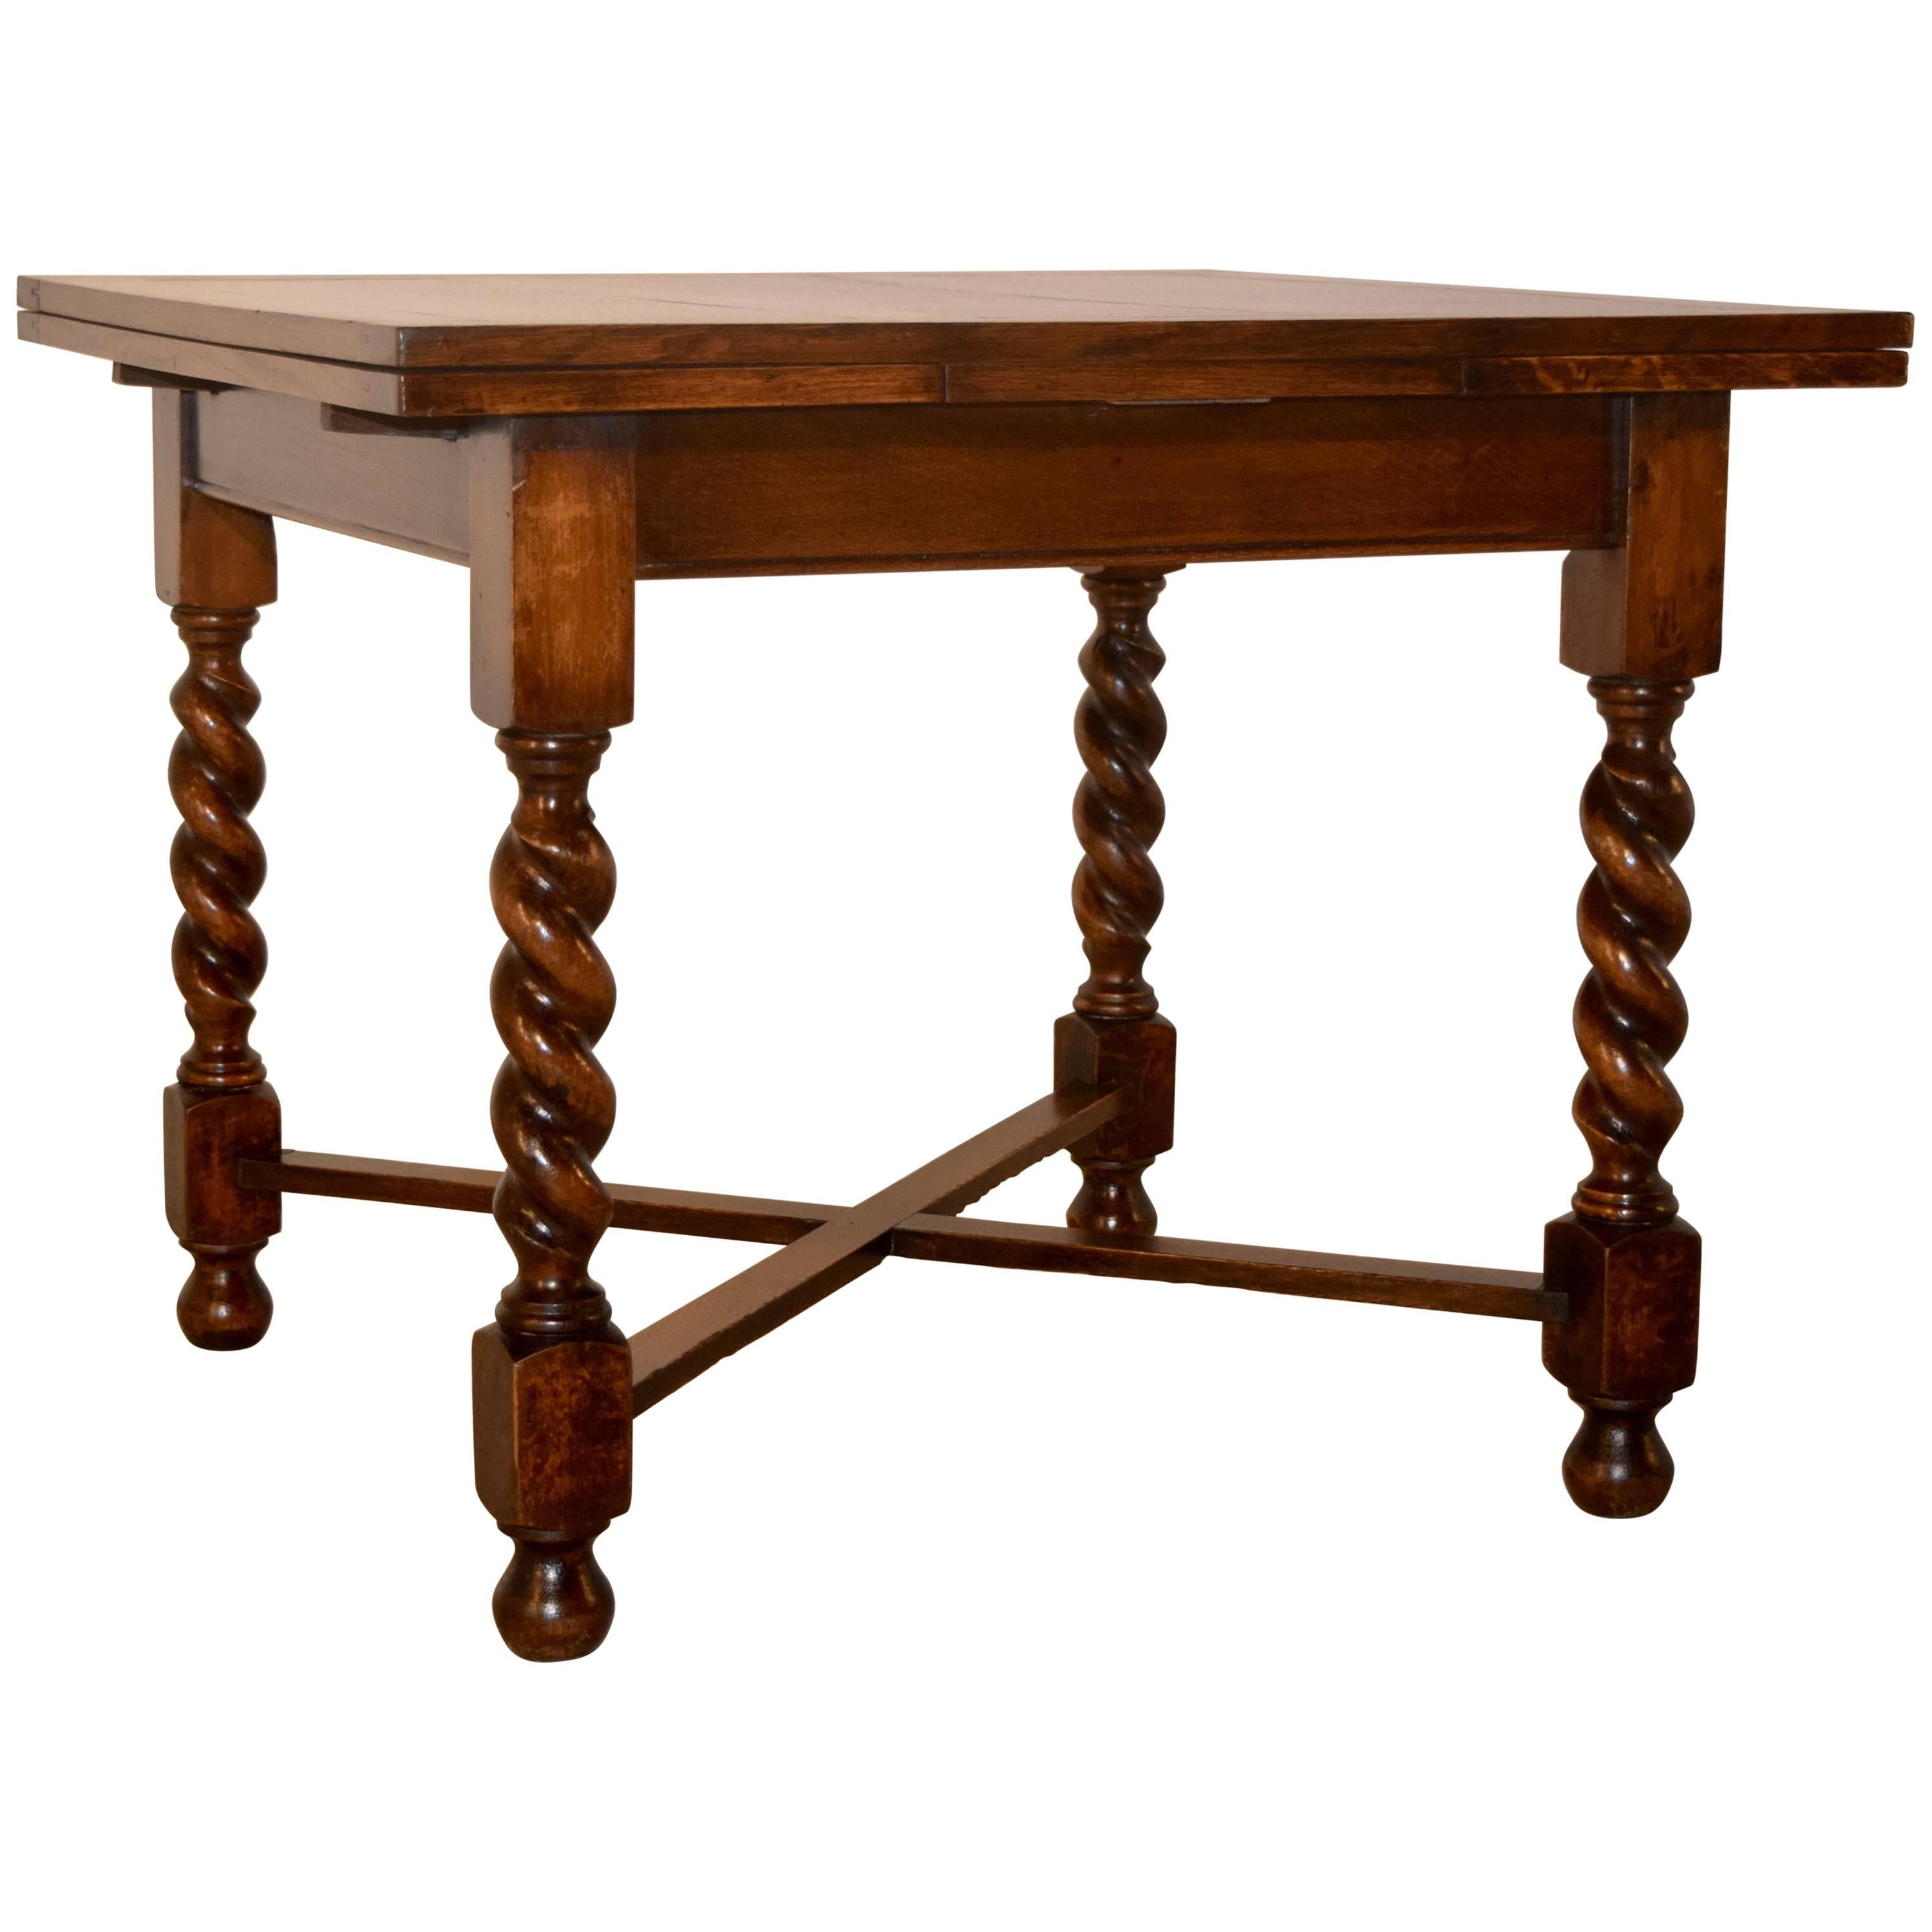 English Table with Draw-Leaves, circa 1900